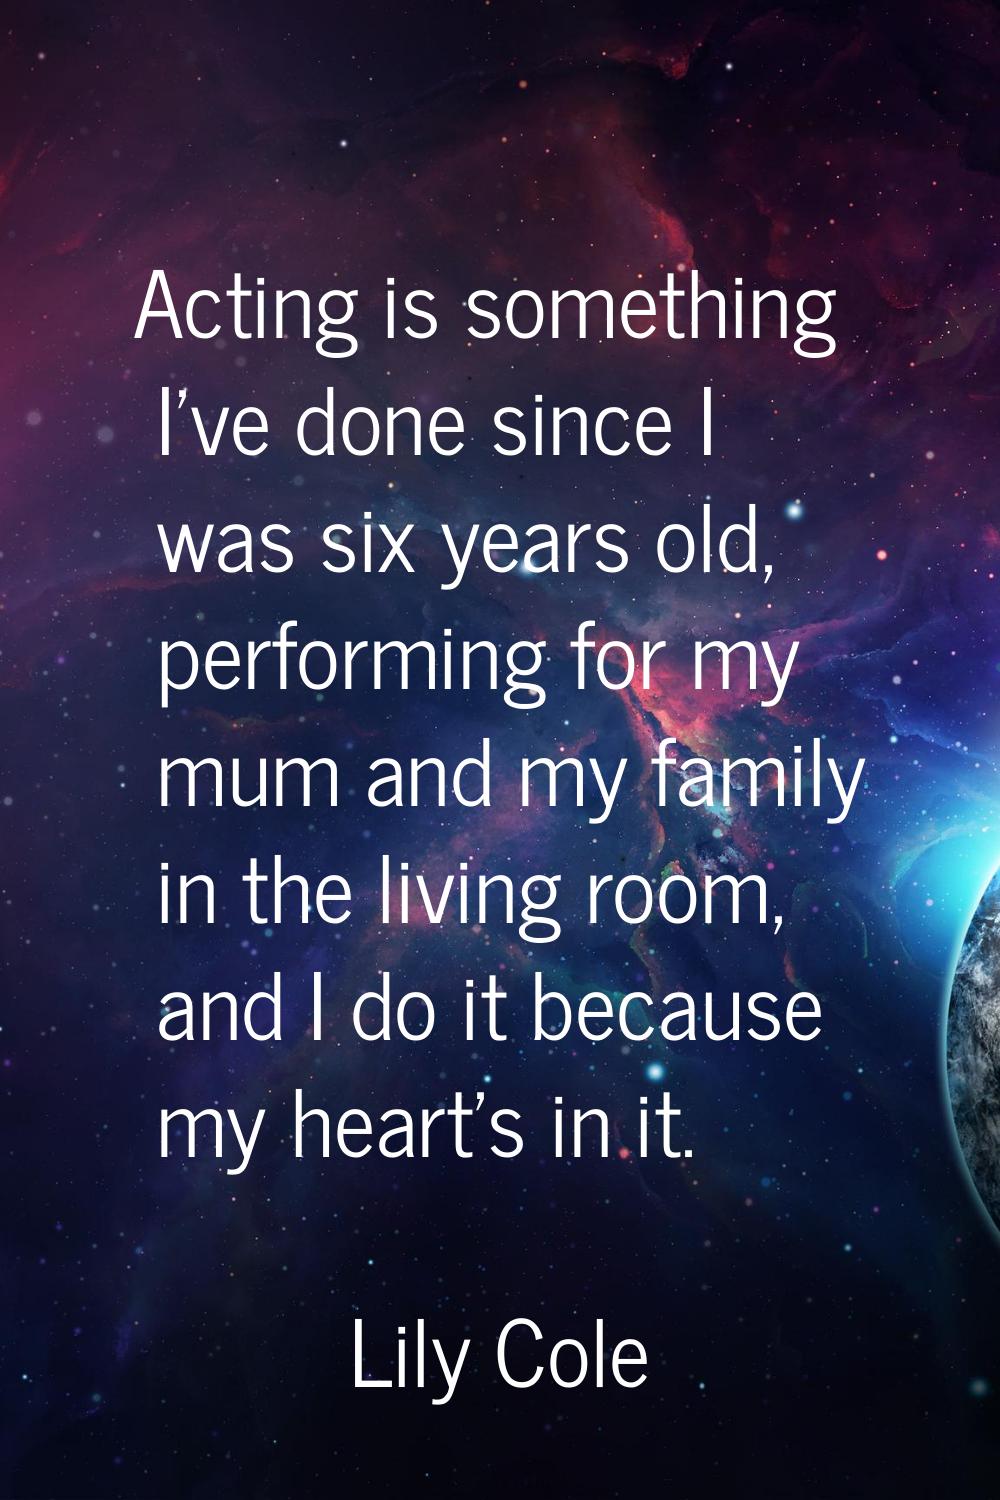 Acting is something I've done since I was six years old, performing for my mum and my family in the